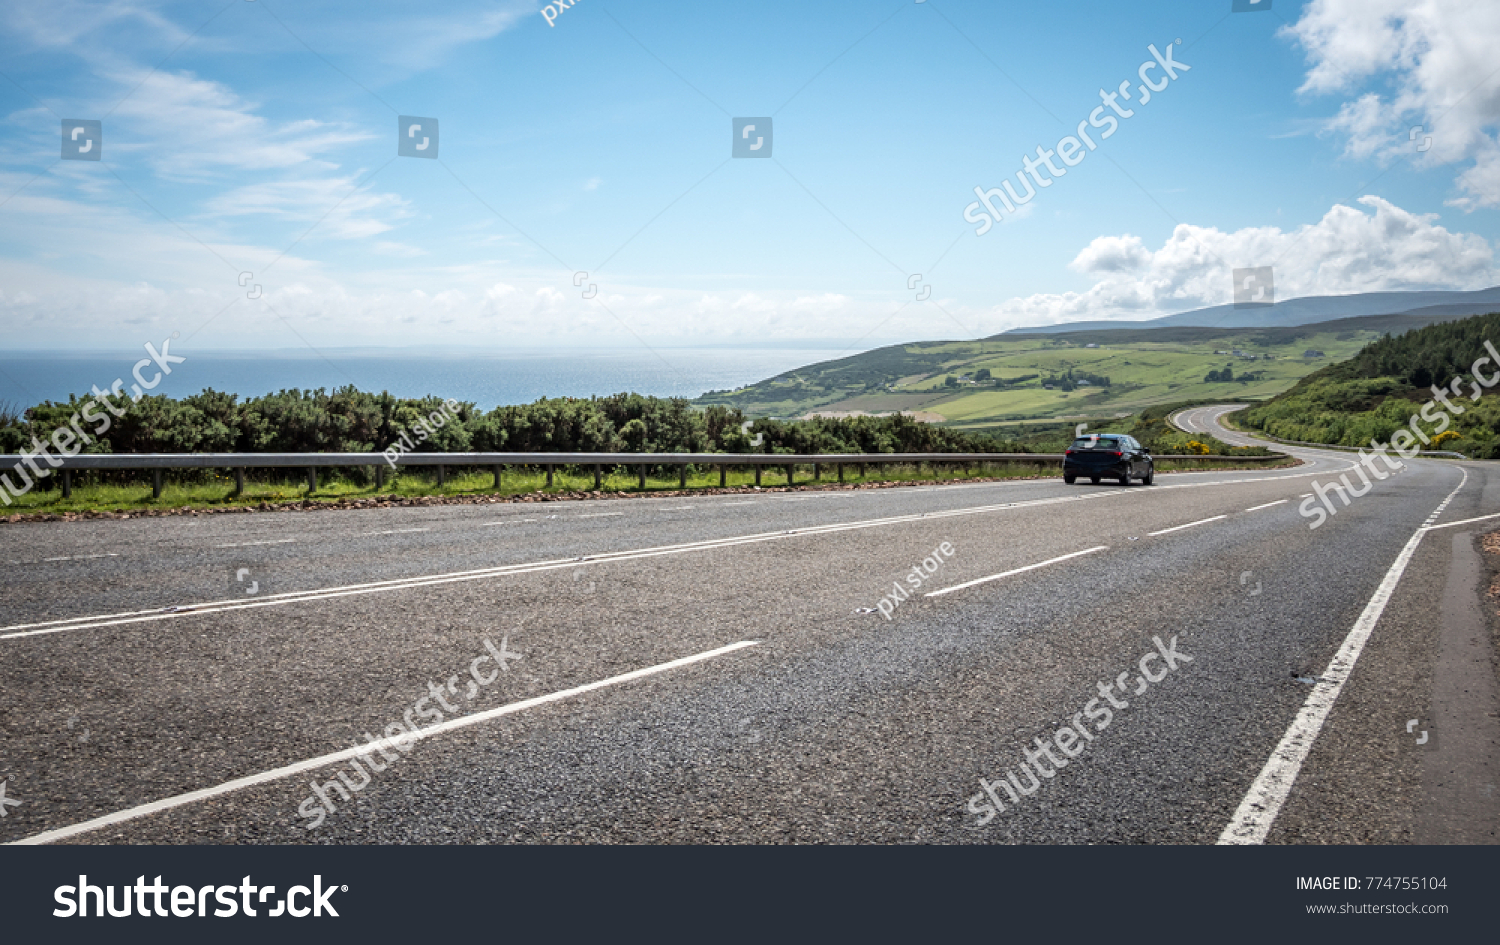 Scottish road trip. A view south along the arterial A9 road north of Helmsdale in the north east of Scotland. The road is one of the most northerly A roads on the British mainland. #774755104